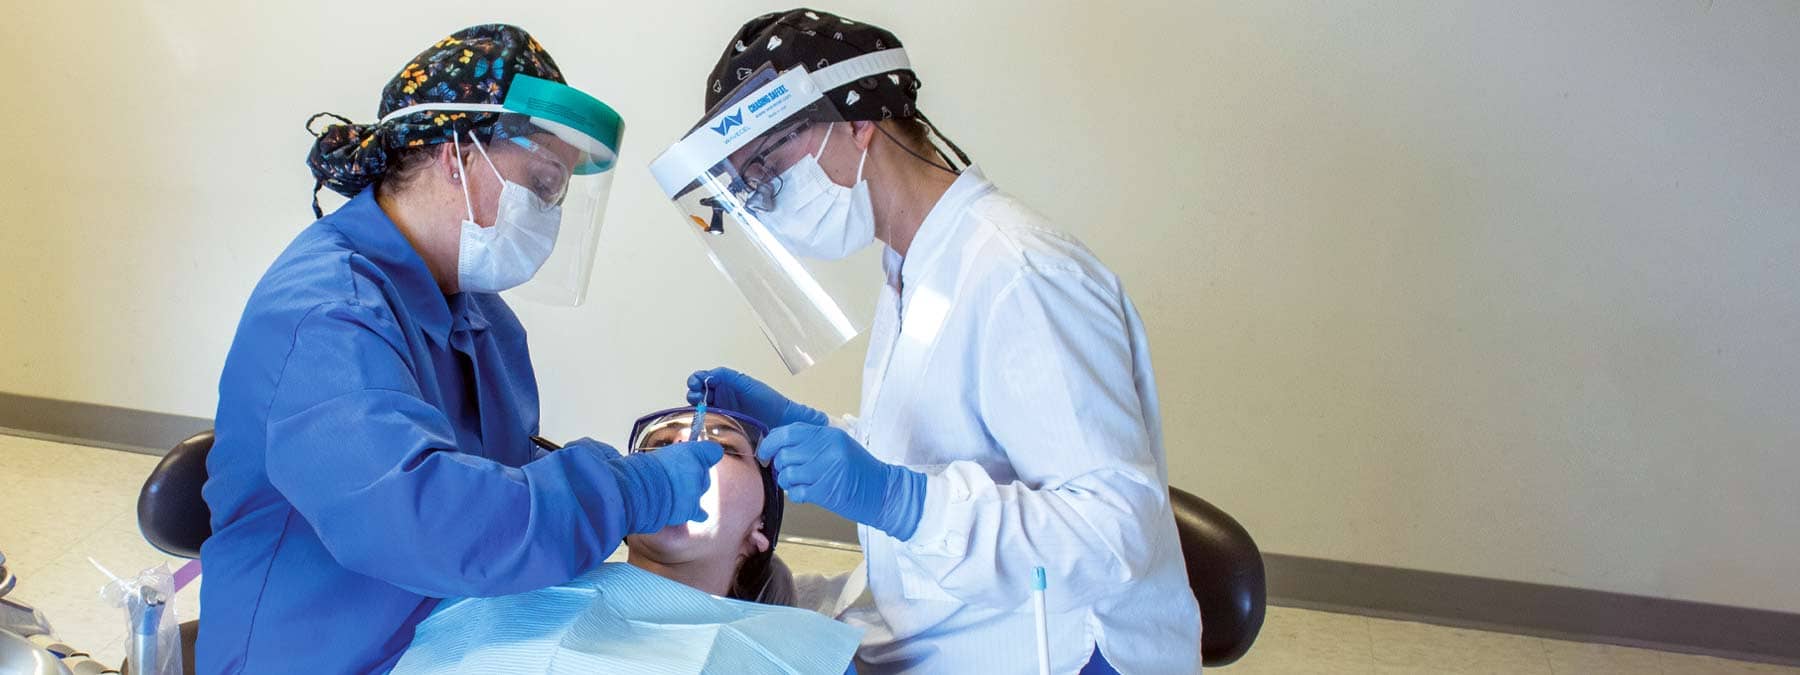 2 dental students working on a patient